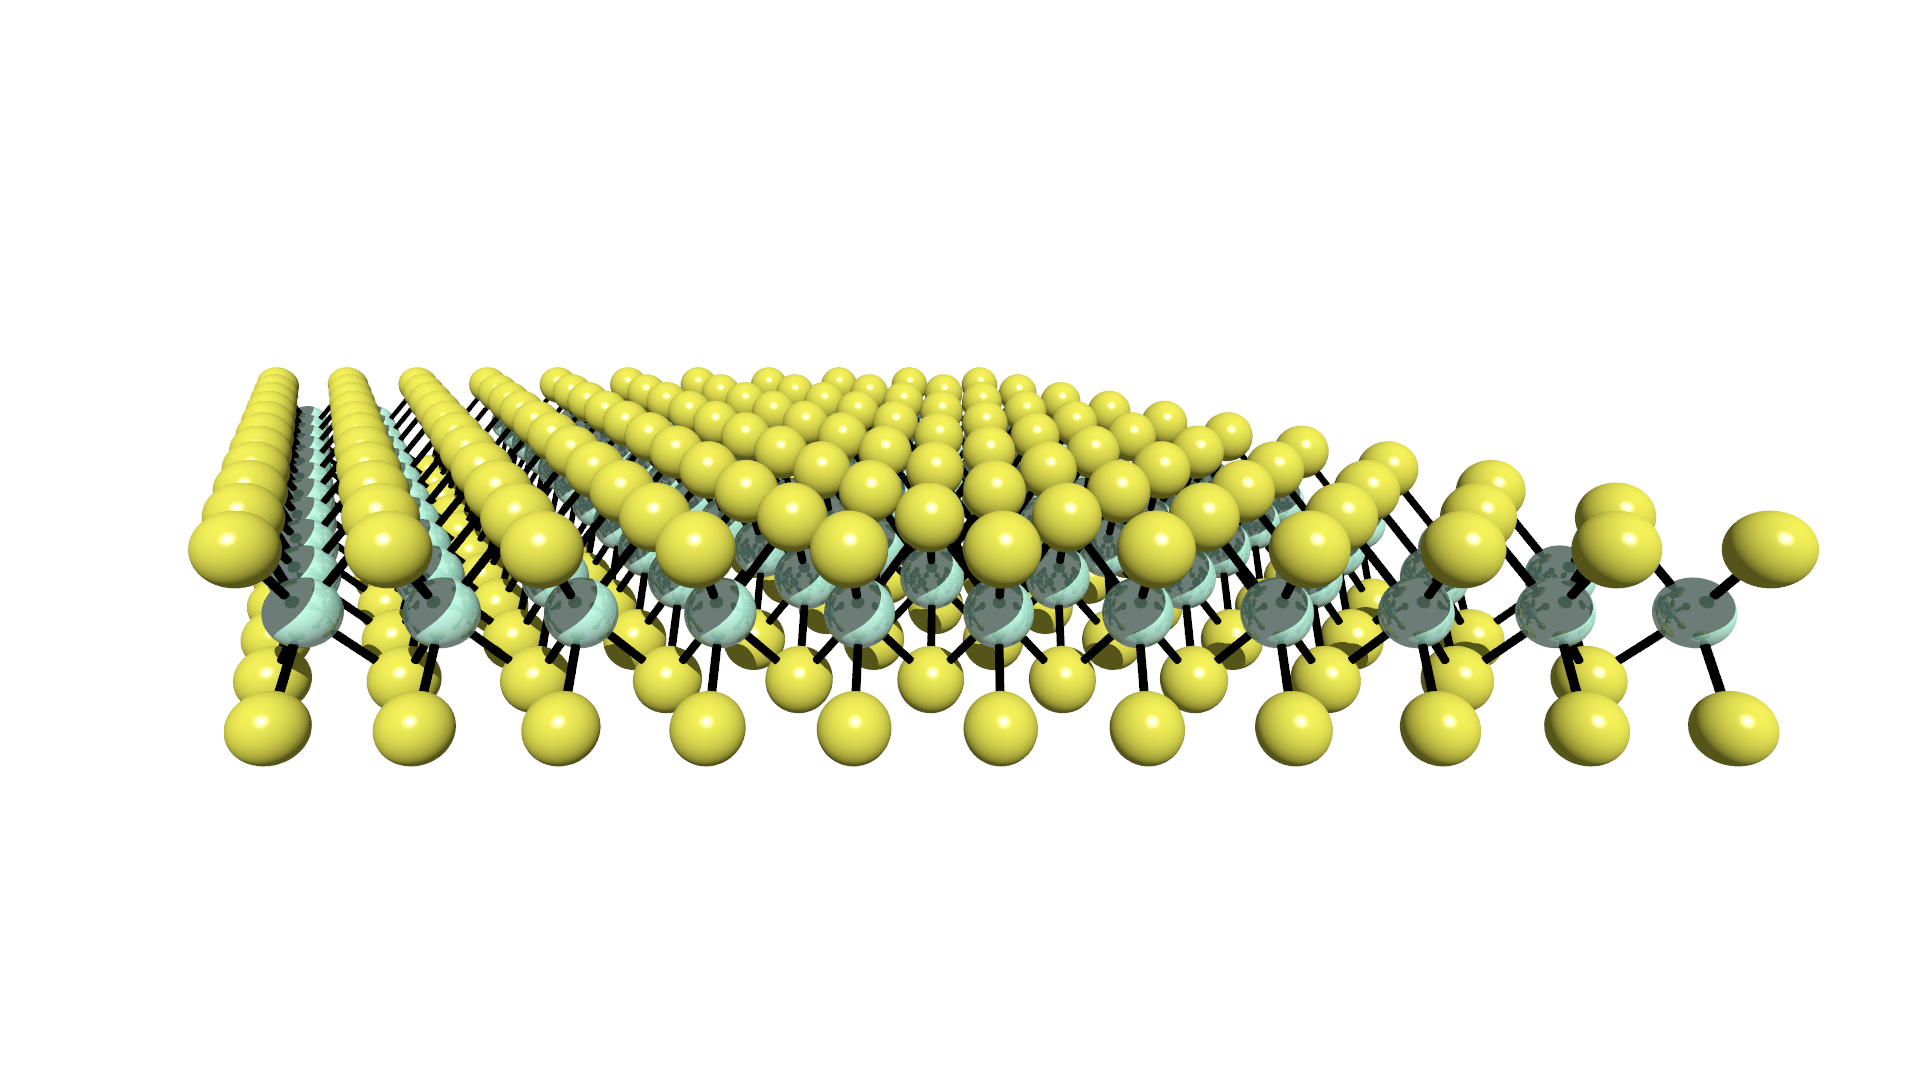 Image Structure of graphene-like materials